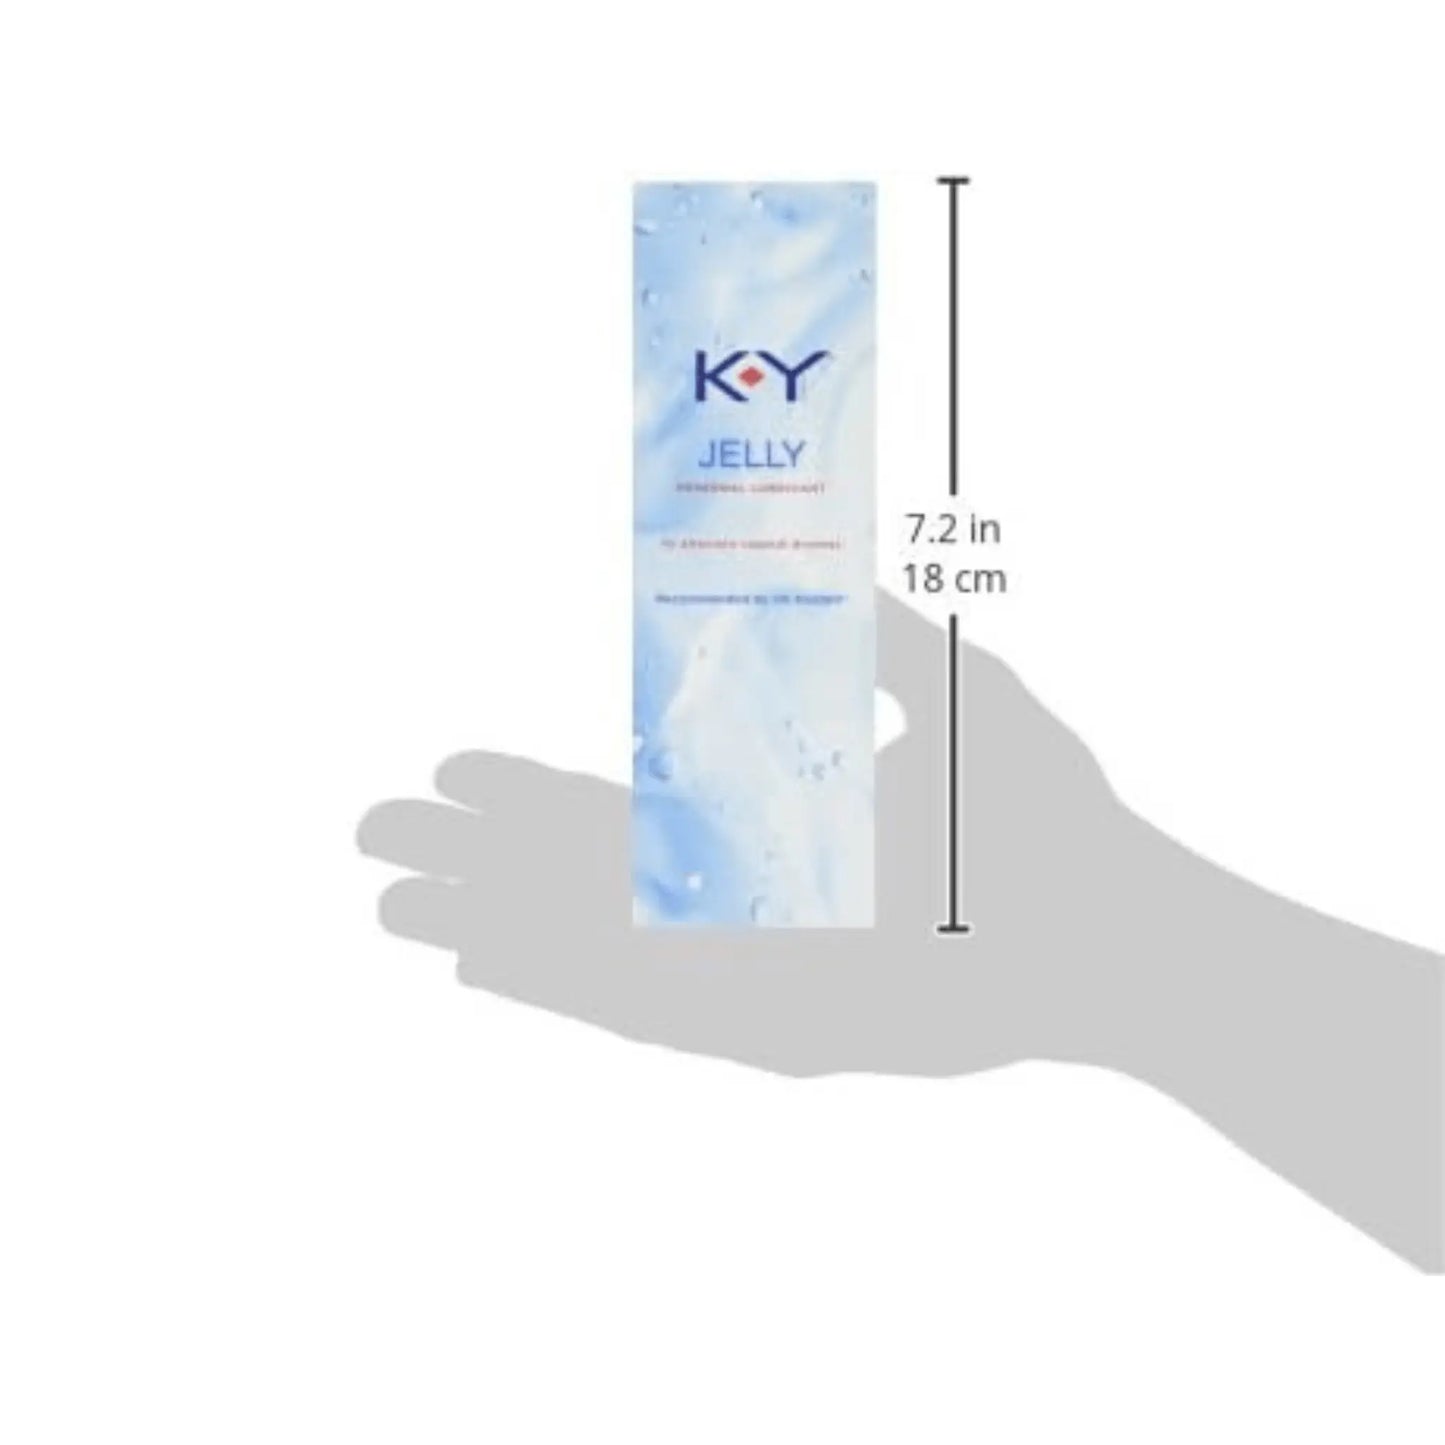 KY Jelly Personal Lubricant, Water Based - 75ml - Arc Health Nutrition